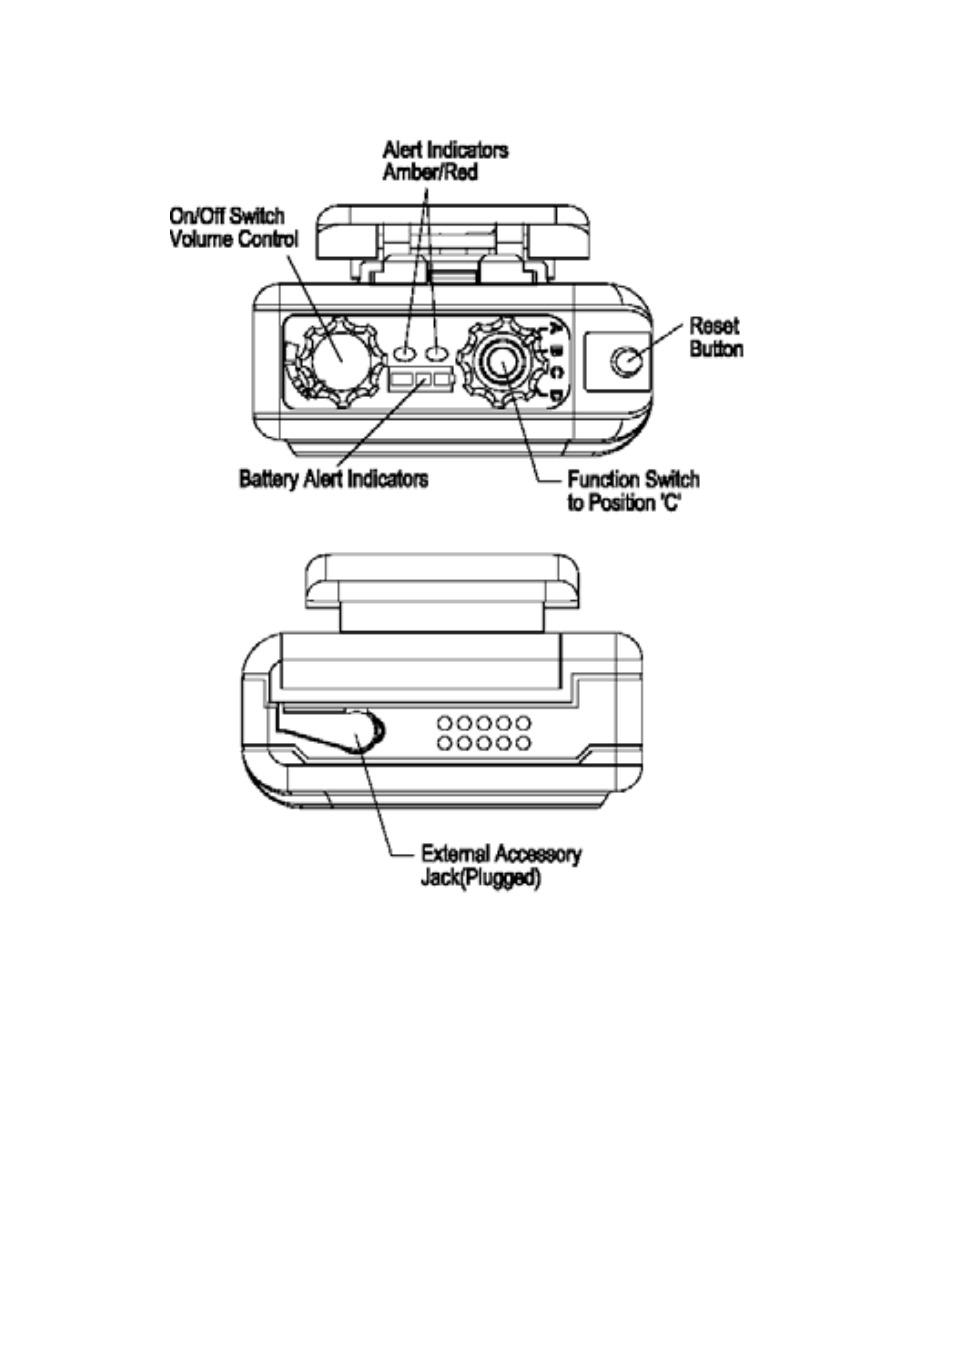 Standard features and controls (all models), On/off switch/volume control | Motorola minitor v User Manual | Page 6 / 17